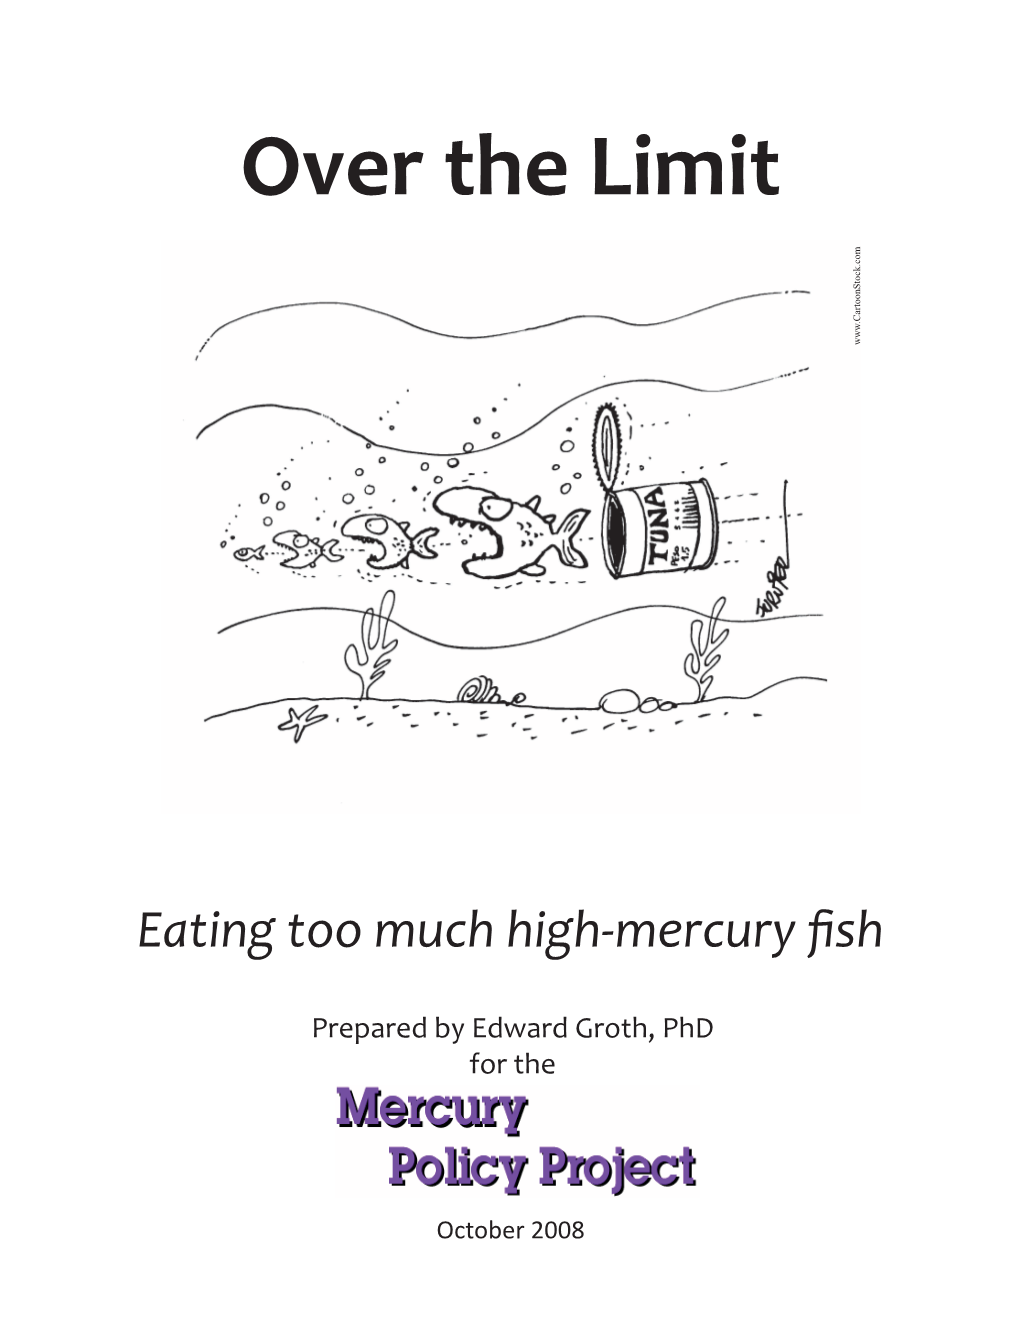 Over the Limit: Eating Too Much High-Mercury Fish